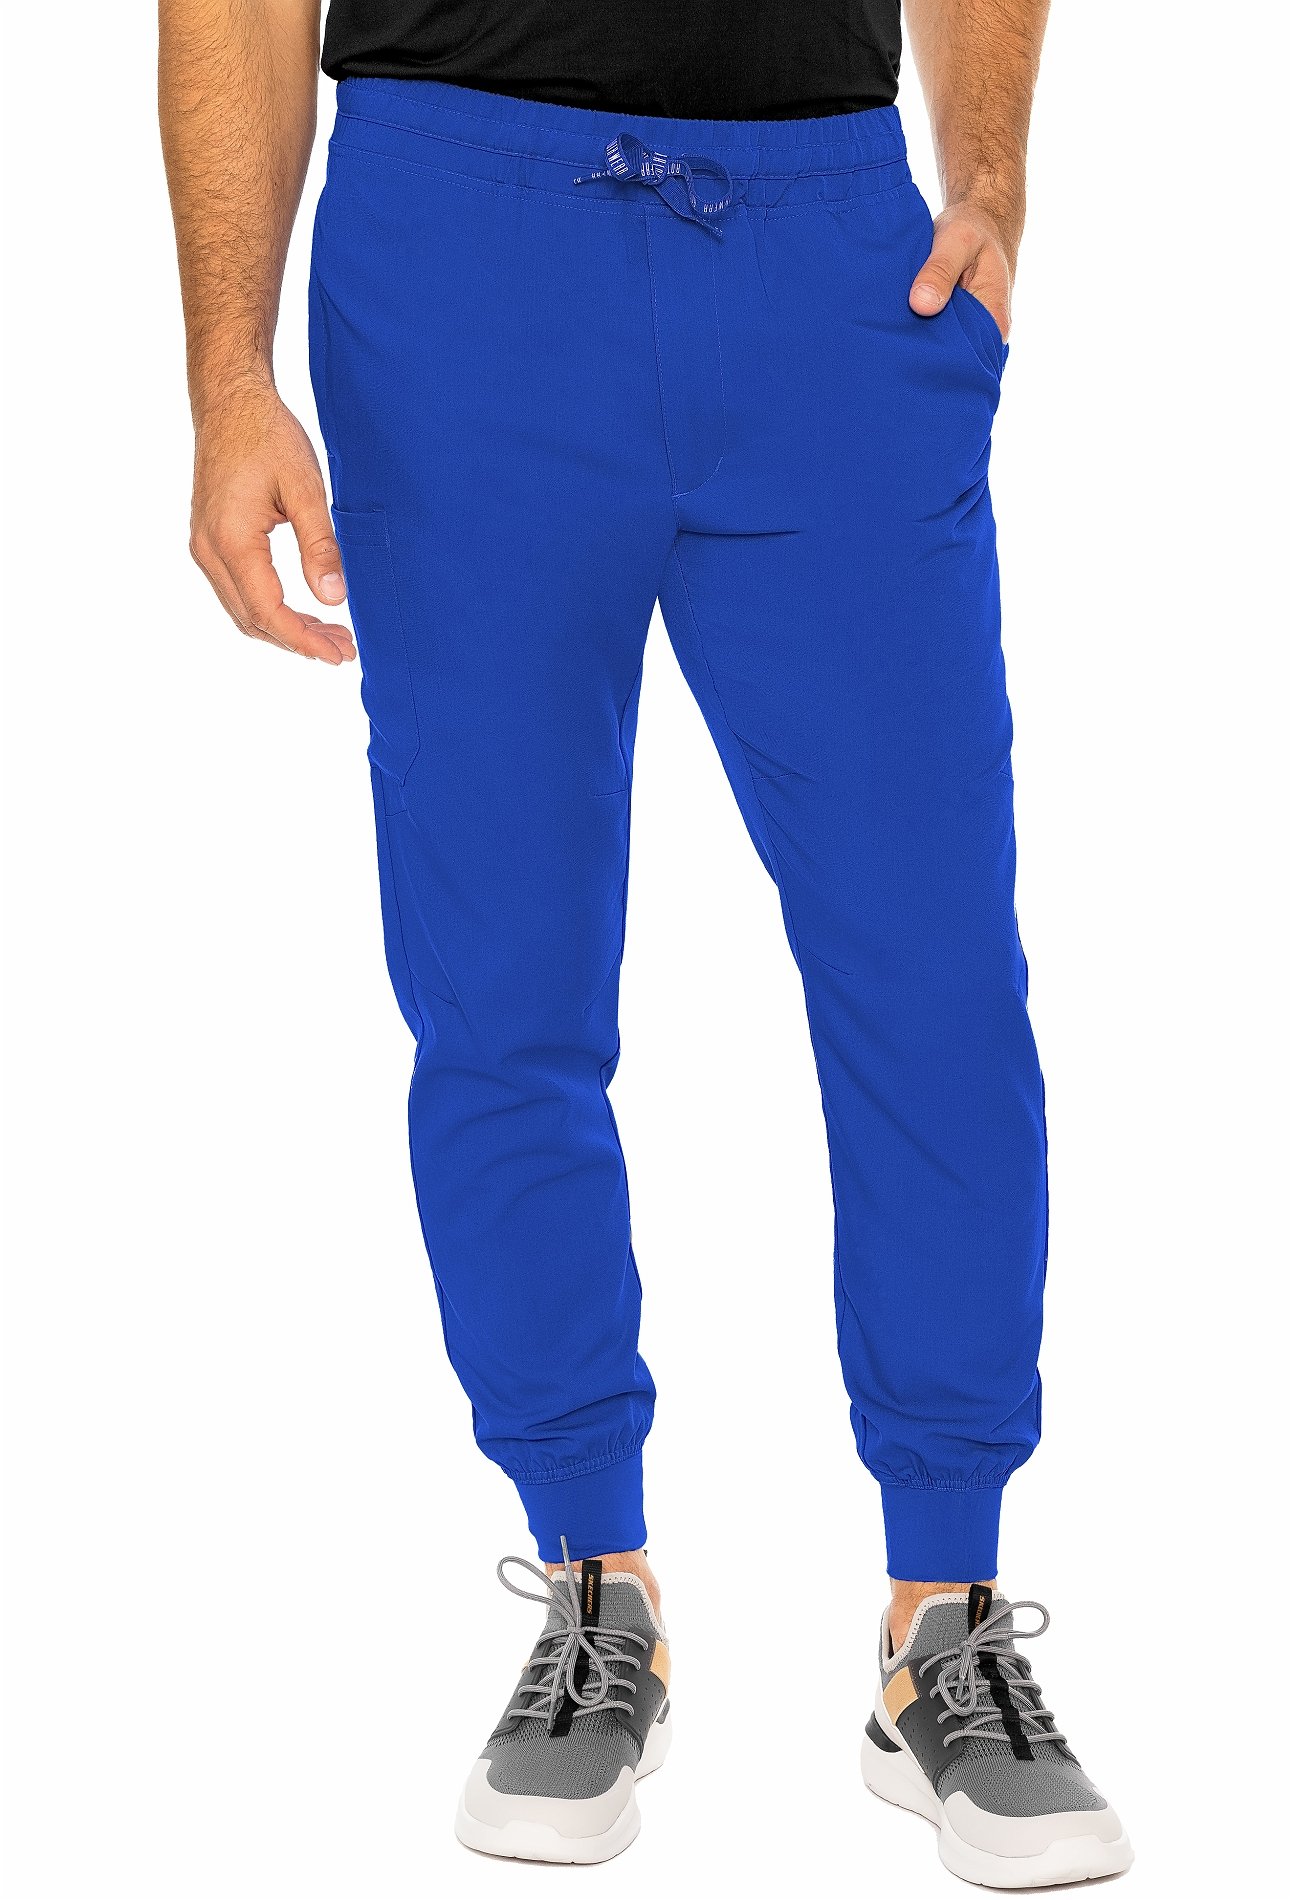 RothWear by Med Couture Men's Bowen Jogger-MC7777